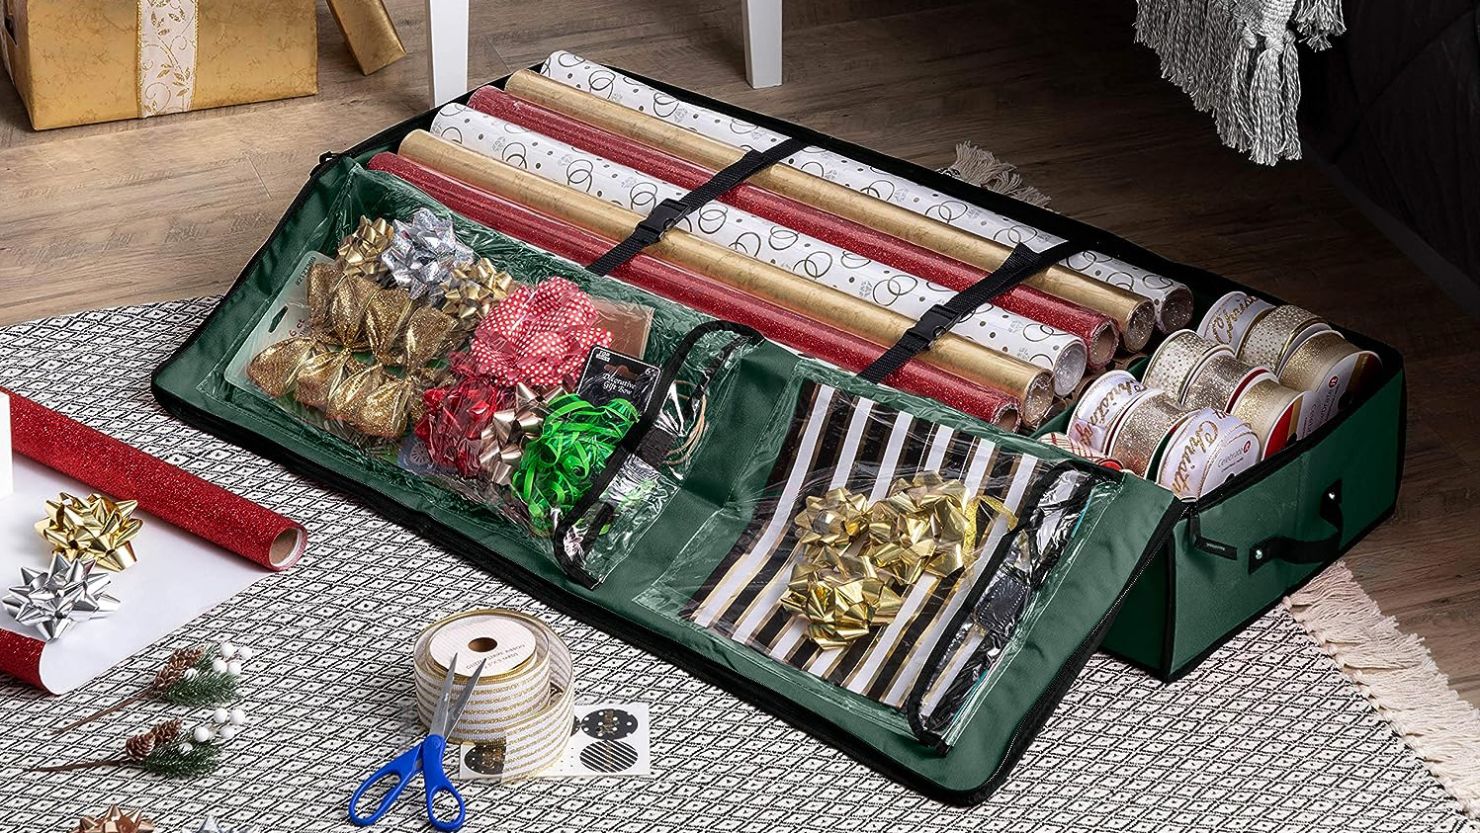 Hearth & Harbor Christmas Wrapping Paper & Holiday Accessories Storage Organizer Box Heavy Duty